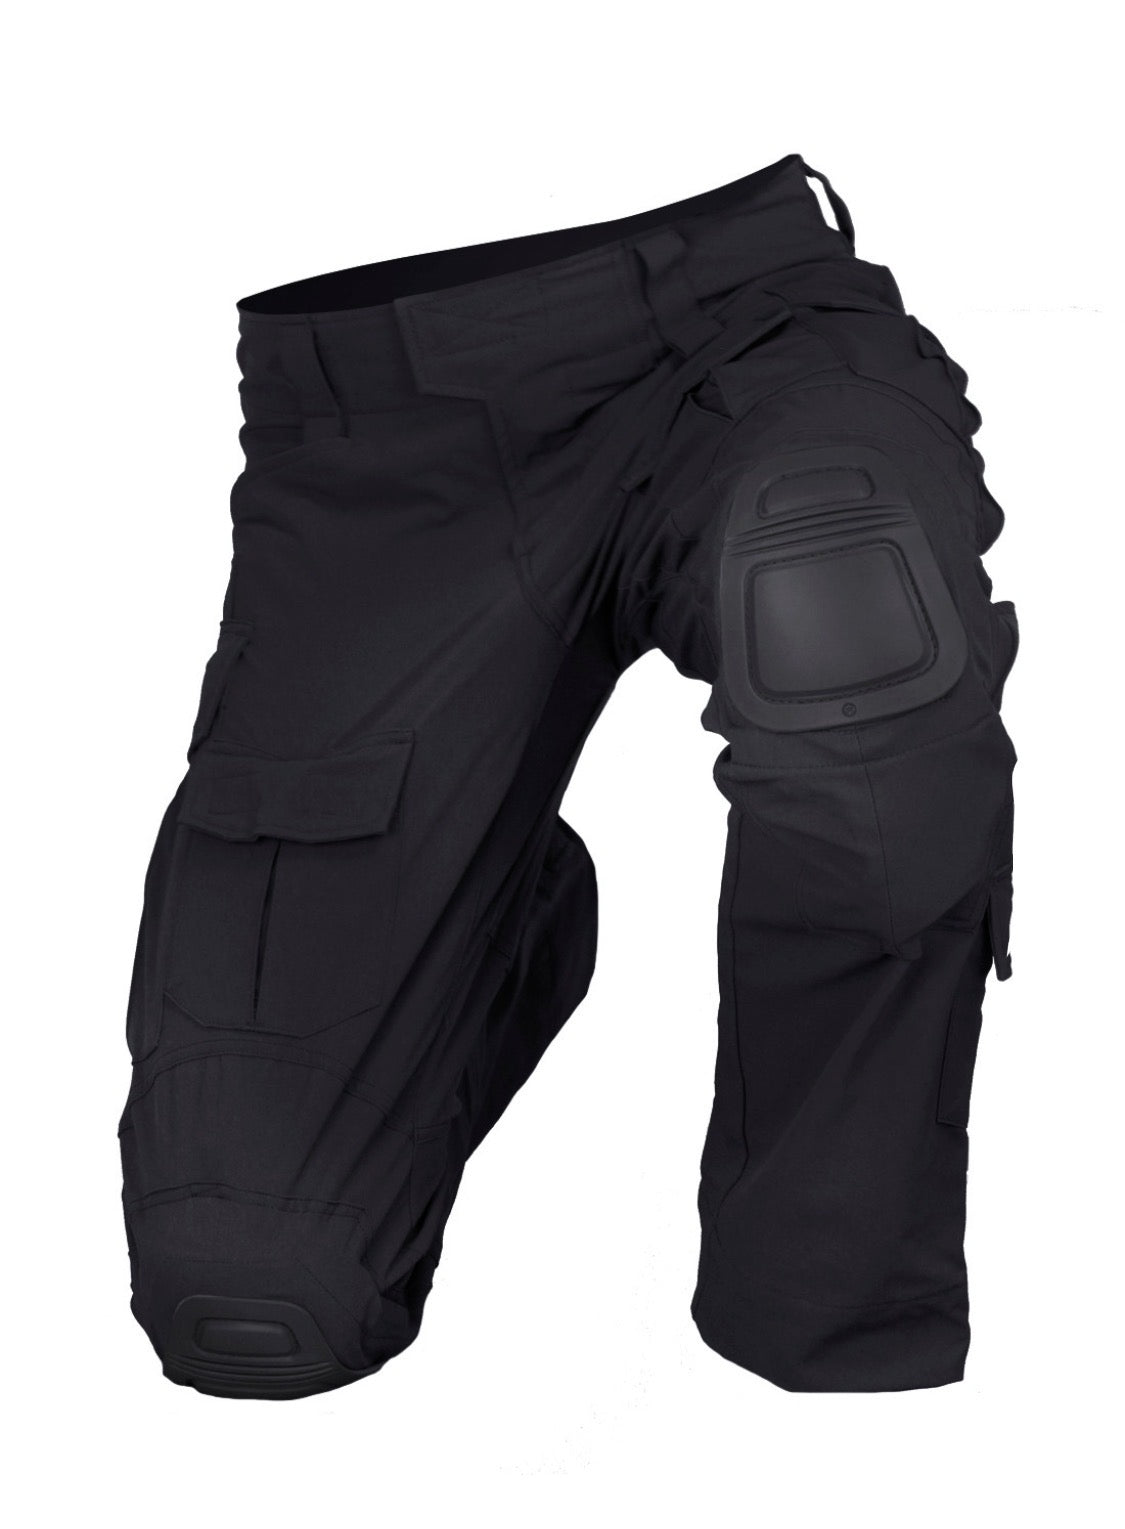 Specter Defense ELITE G3 BLACK TACTICAL PANT with KNEE PADS